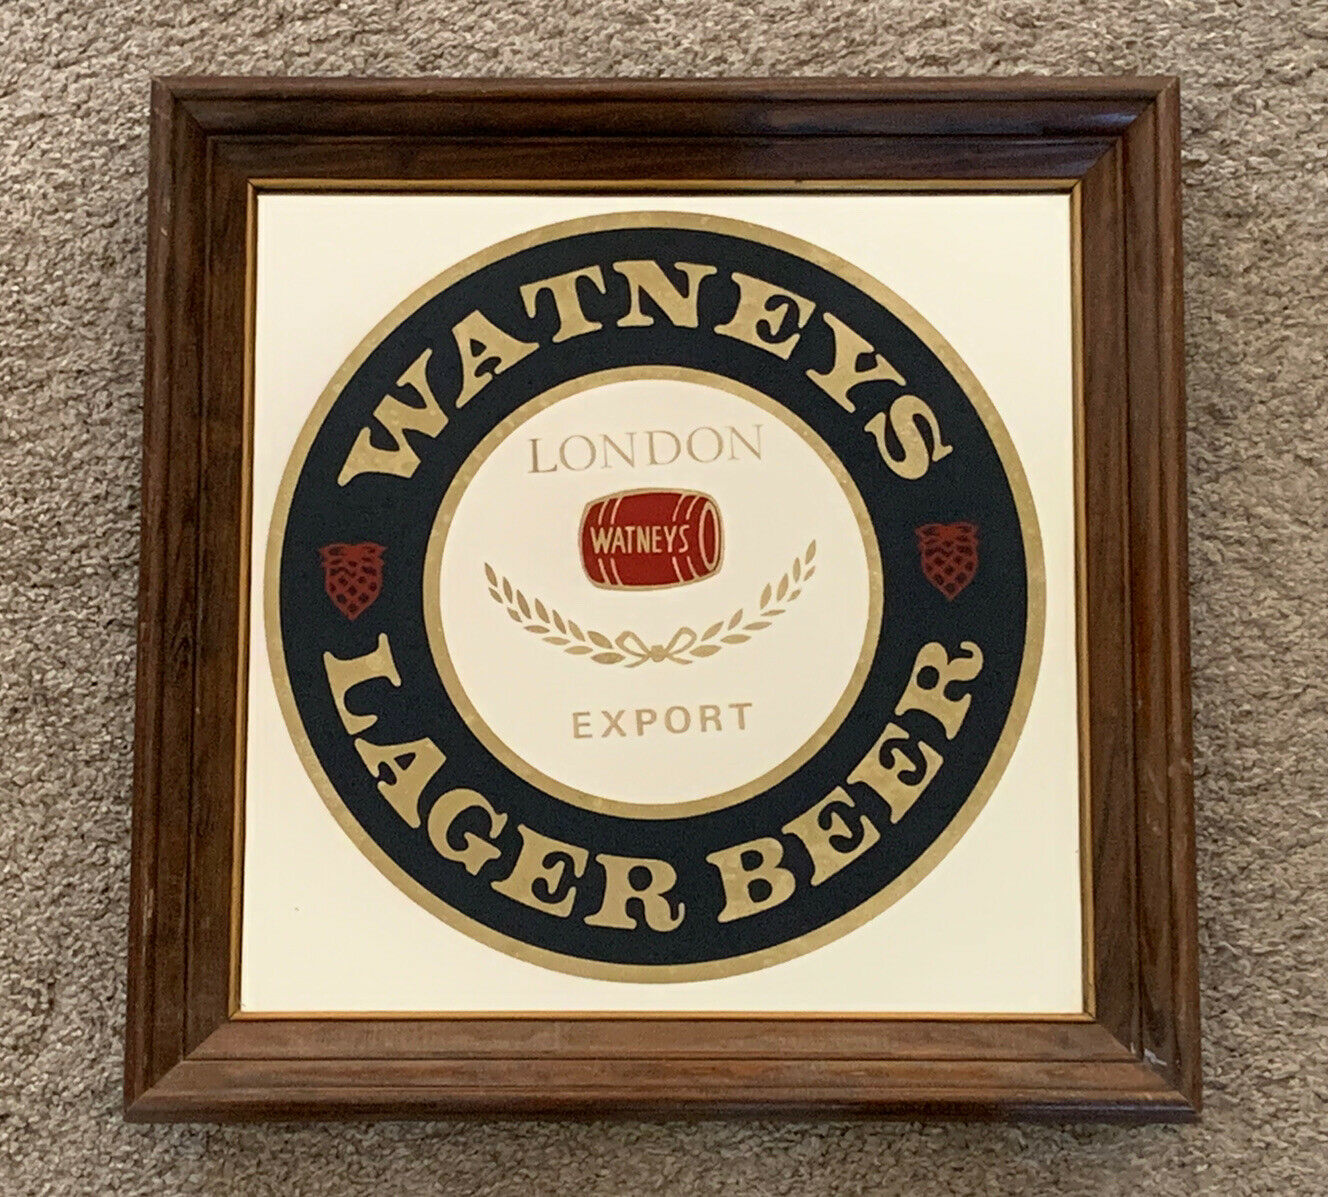 London England Watneys Imported Red Barrel Lager Beer Mirror Sign, Man Cave, Bar